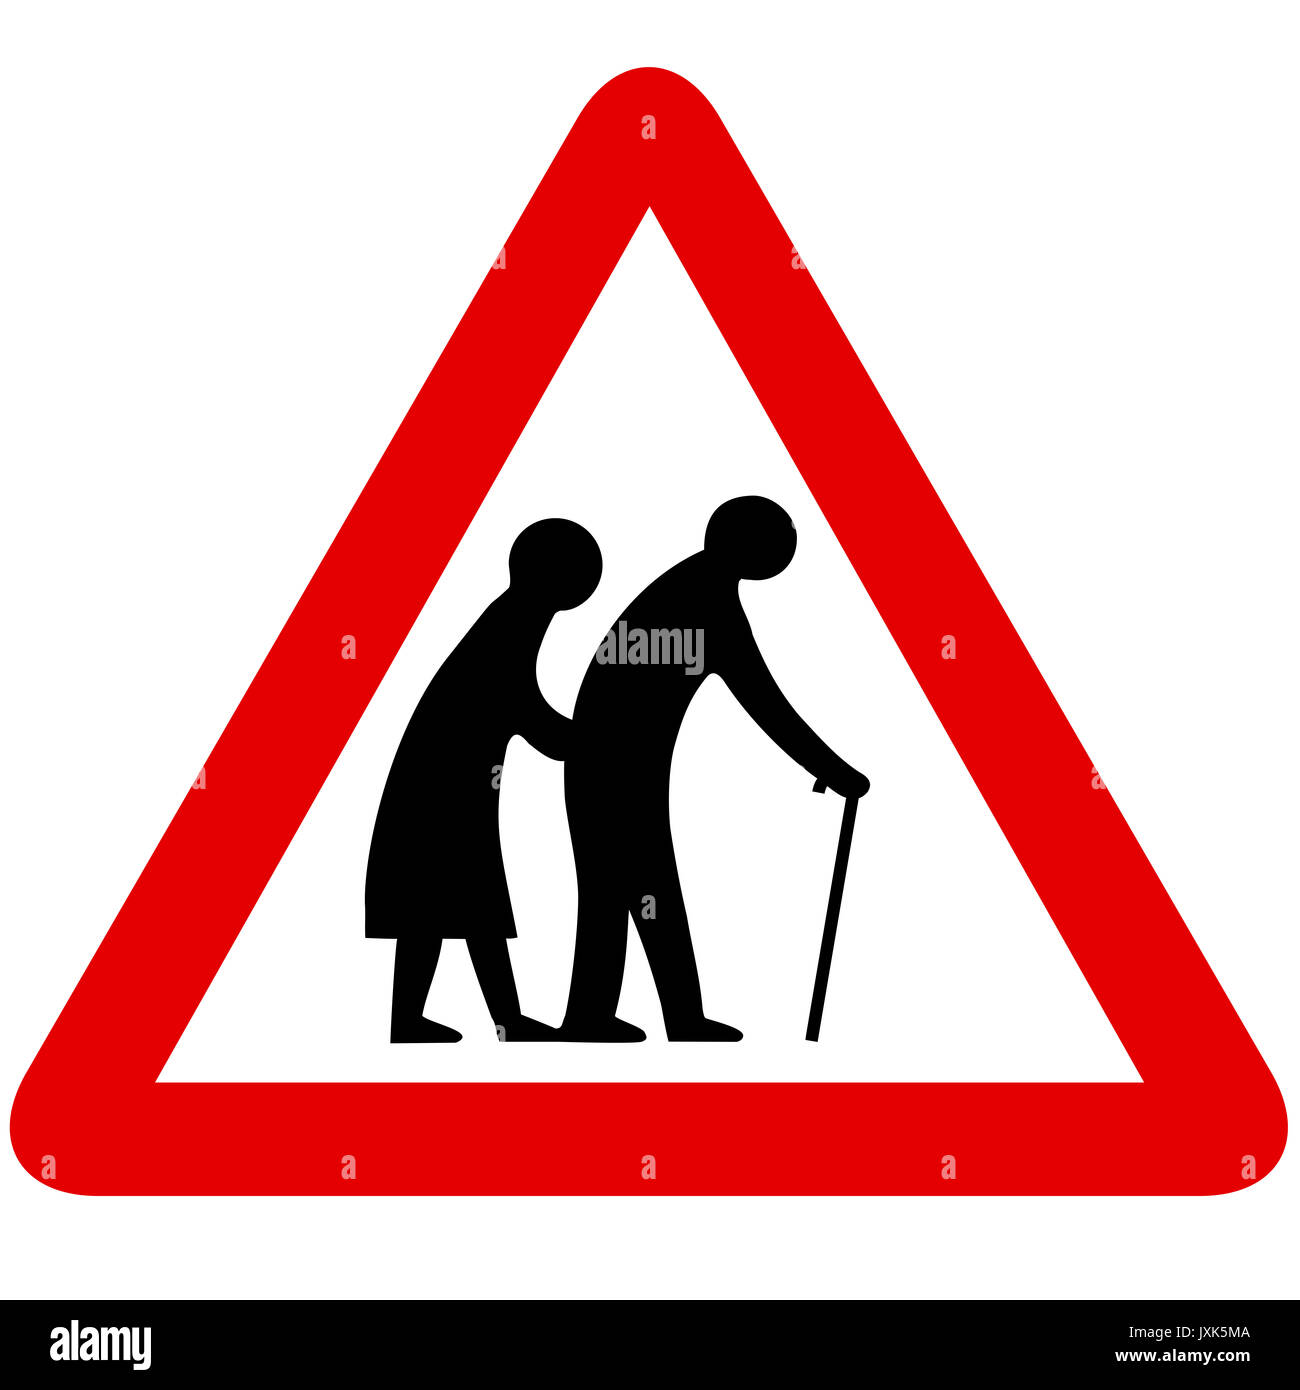 Frail pedestrians likely to cross road ahead road sign on white background Stock Photo